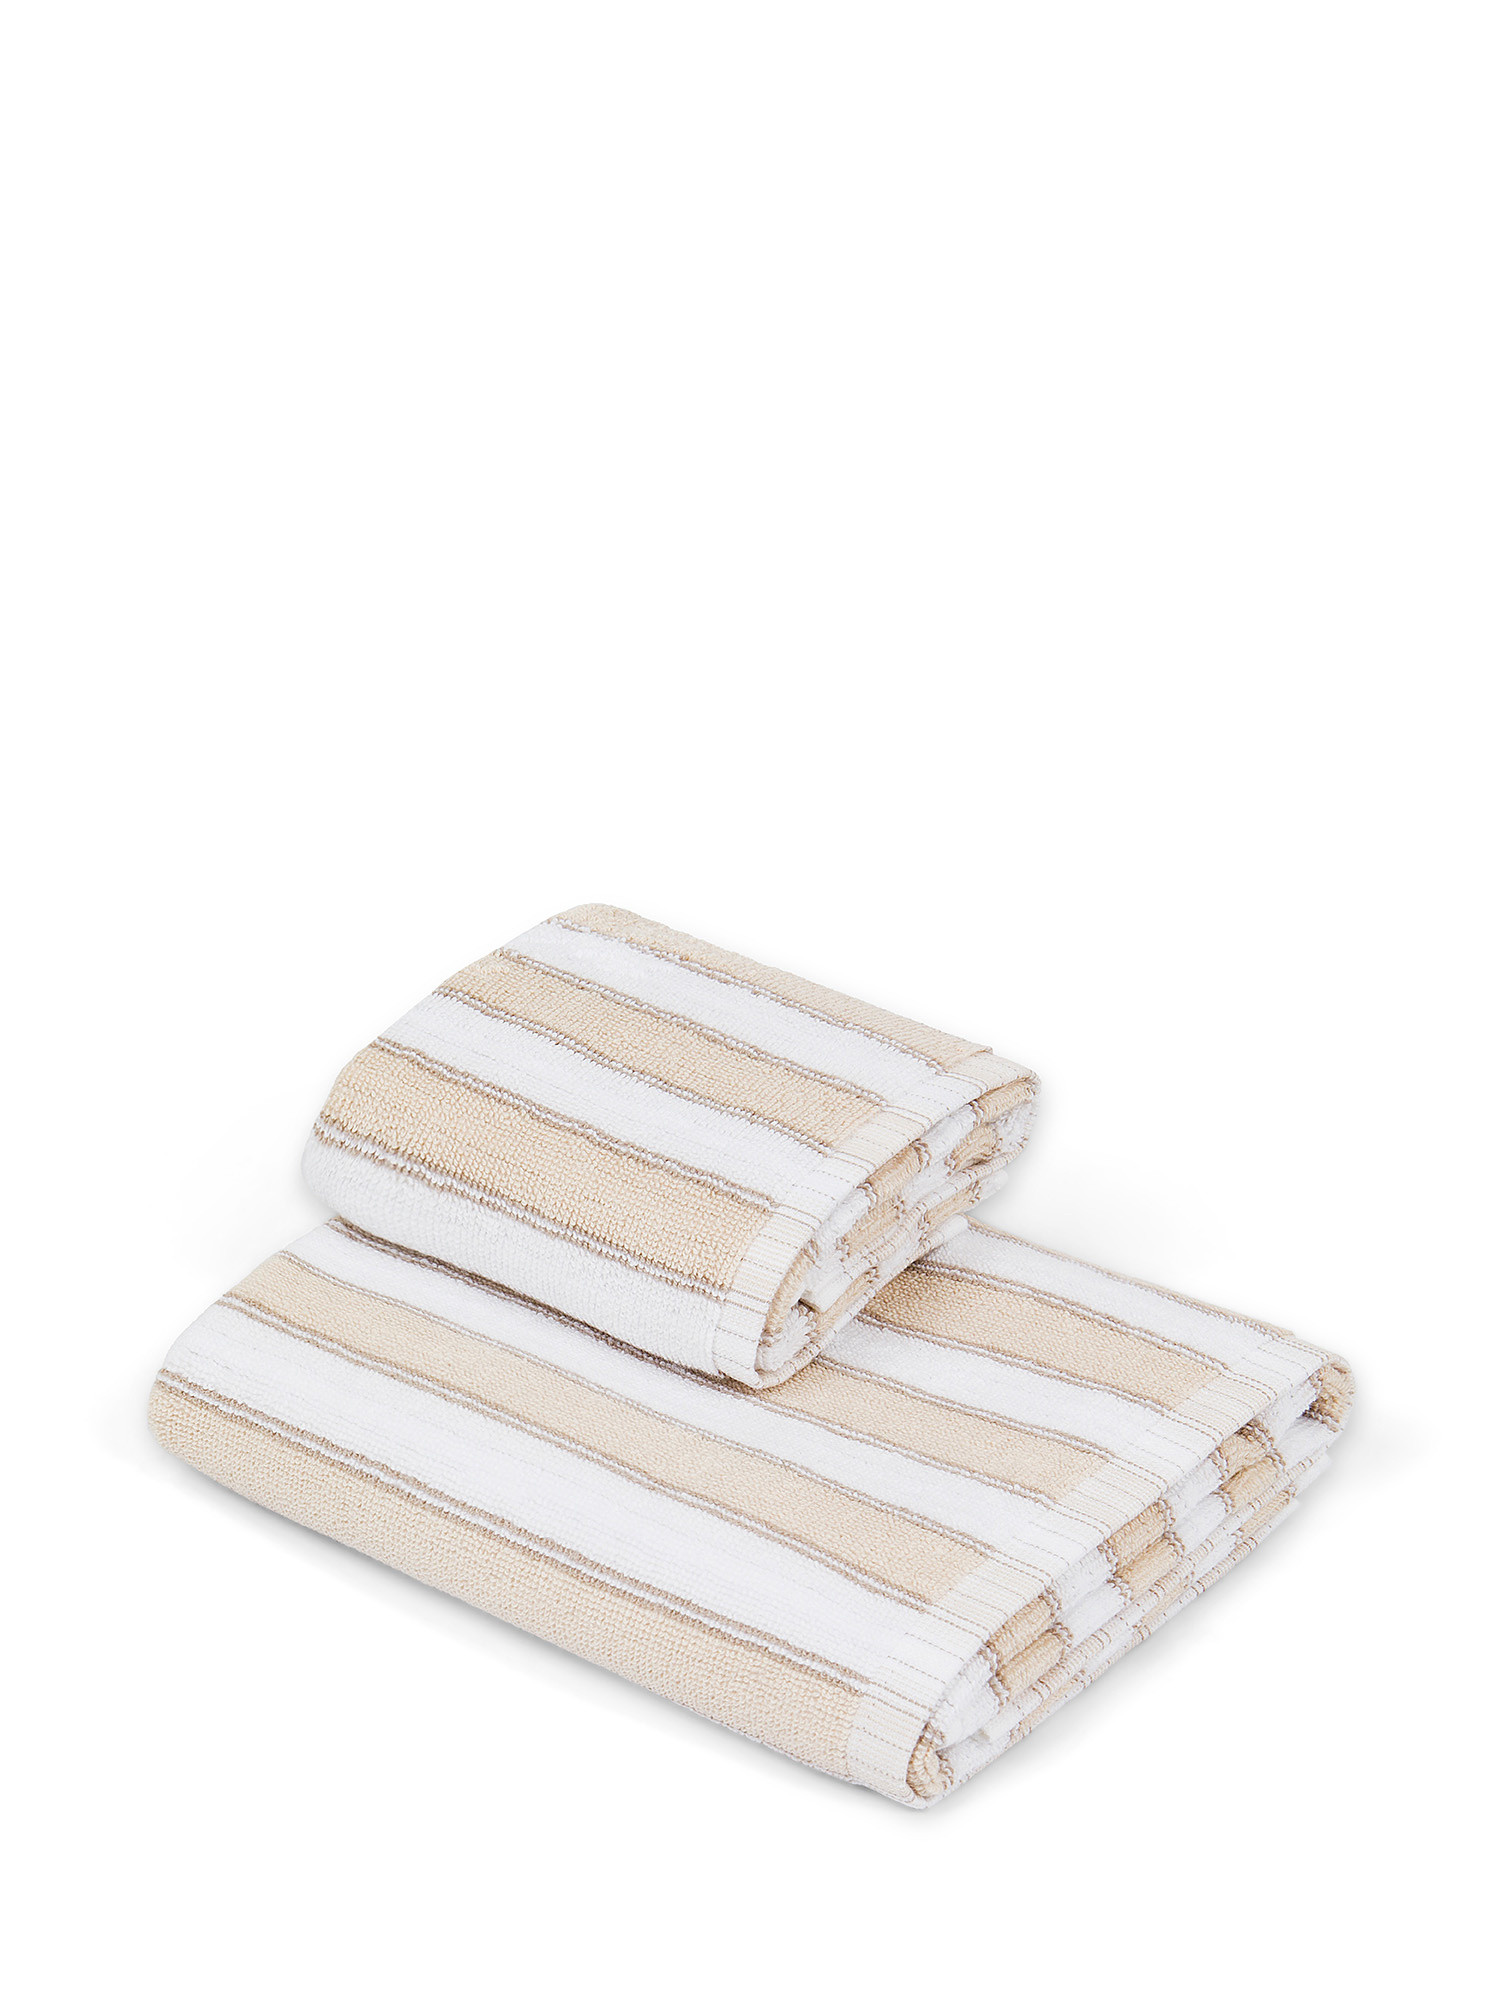 Pure cotton terry towel., Beige, large image number 0